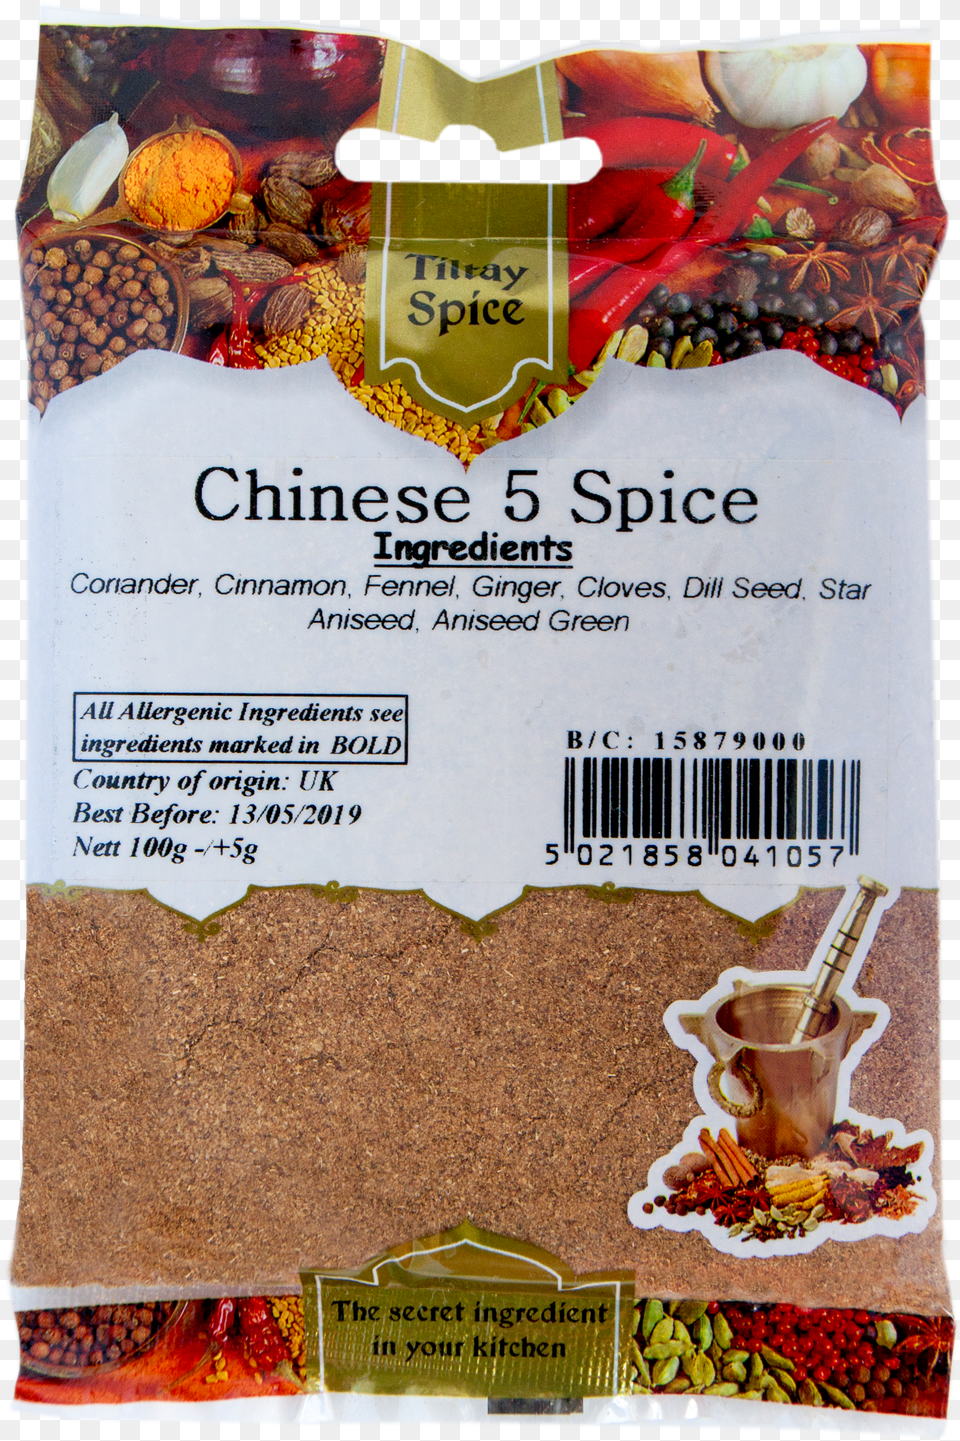 Tiltay Spice Chinese 5 Spice Packaging And Labeling Free Transparent Png